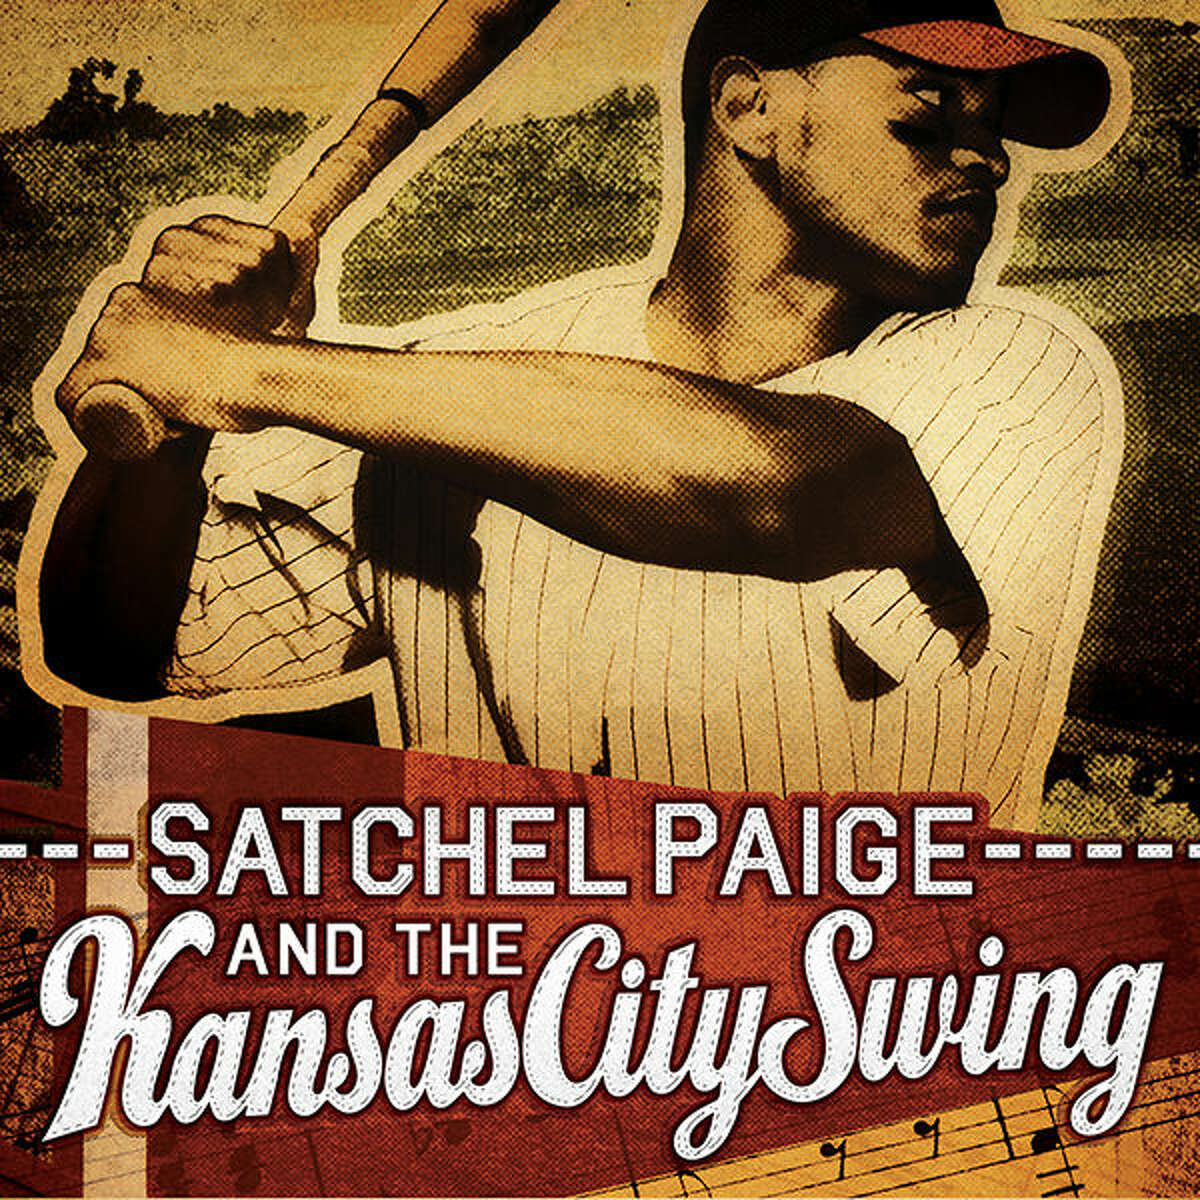 Here's History: Satchel Paige